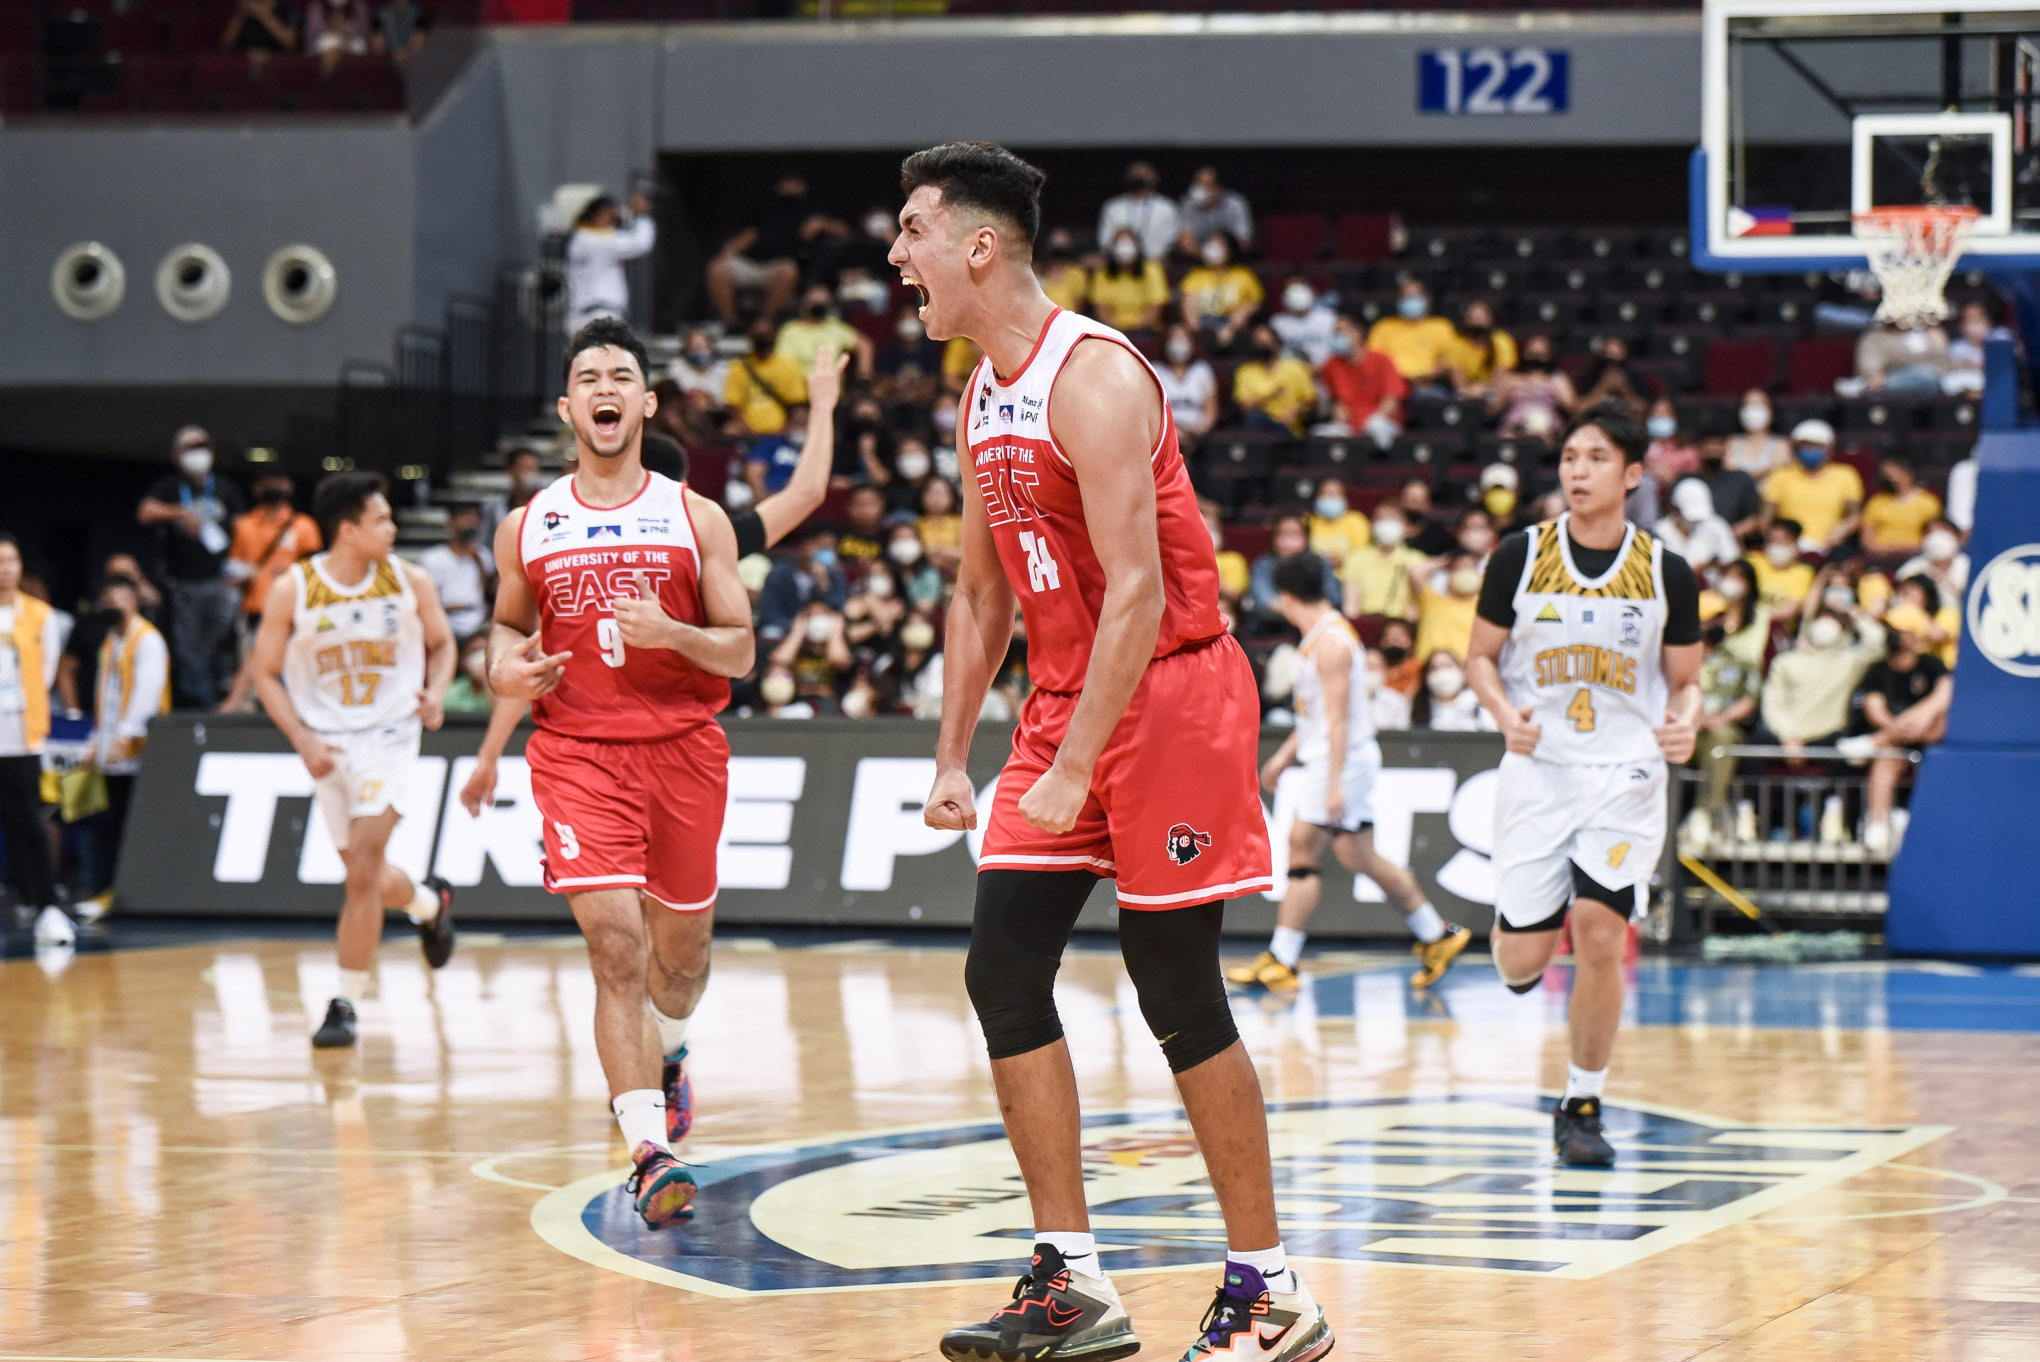 UAAP85-MBB-LUIS-VILLEGAS-4 Hoop Nut: Studs and duds after five games in UAAP 85 ADMU Bandwagon Wire Basketball DLSU FEU NU UAAP UE UP  - philippine sports news